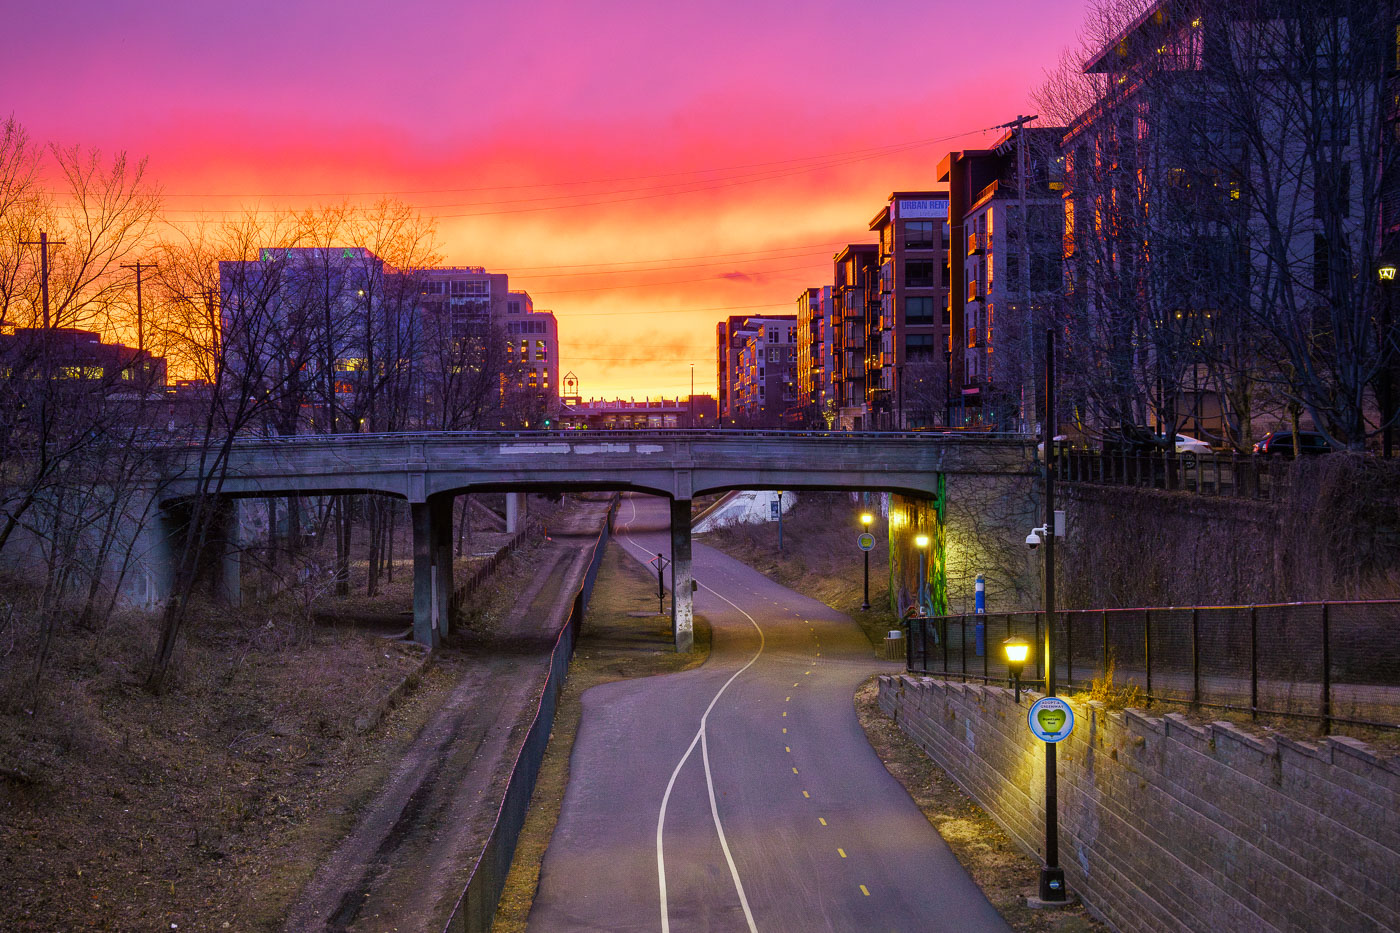 This has to be one of the best sunsets i've seen in quite some time. Taken from above the Midtown Greenway on a warm spring evening.